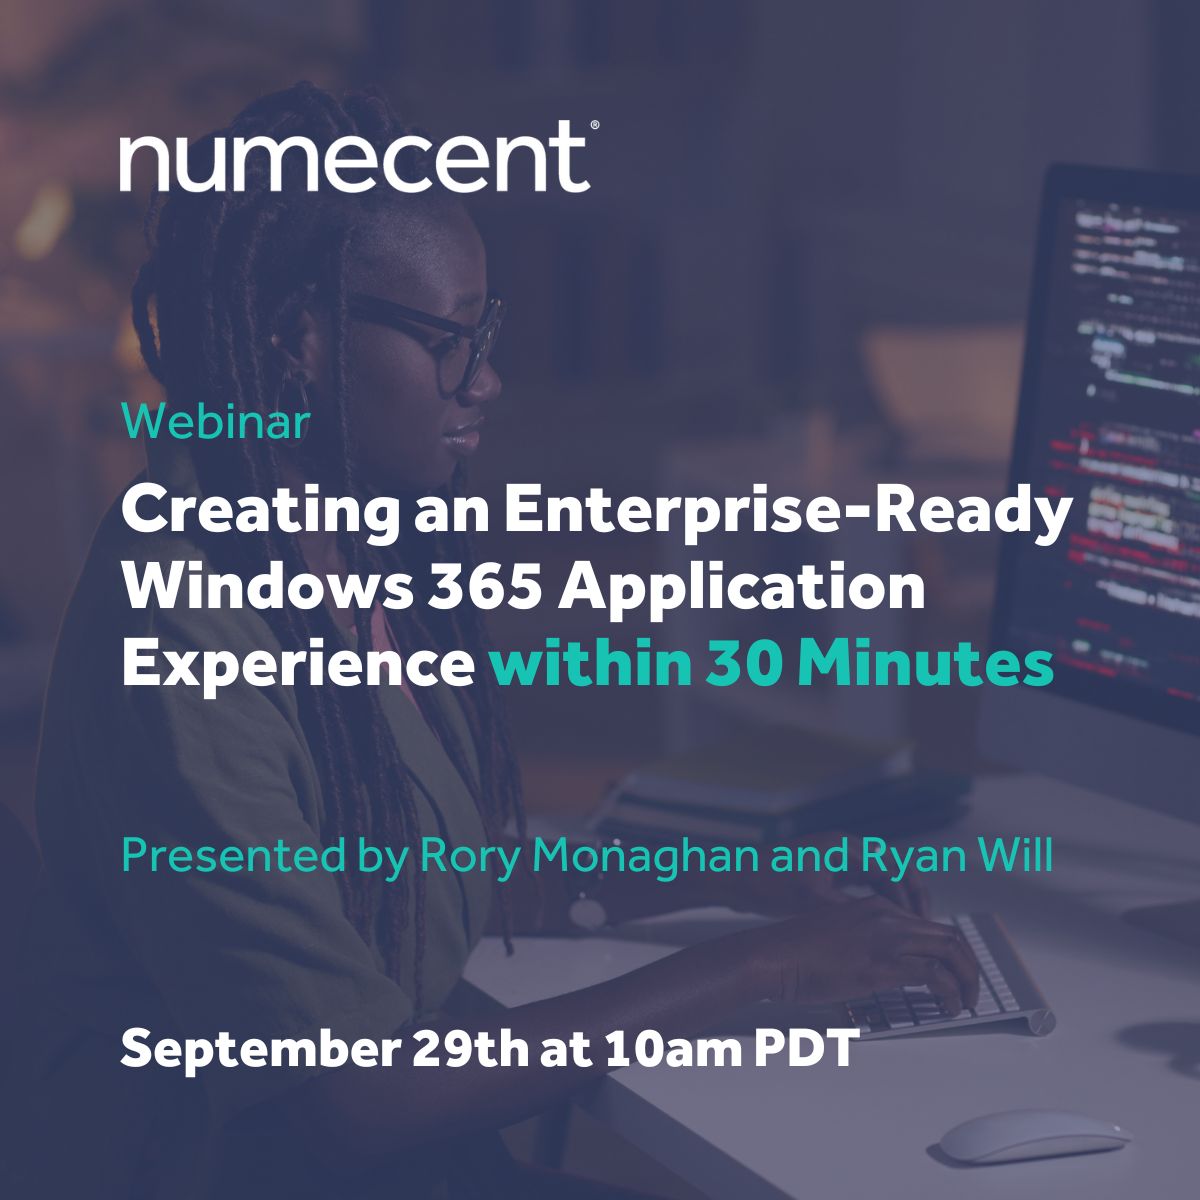 Webinar Title: Creating an enterprise-ready Windows 365 application experience within 30 minutes